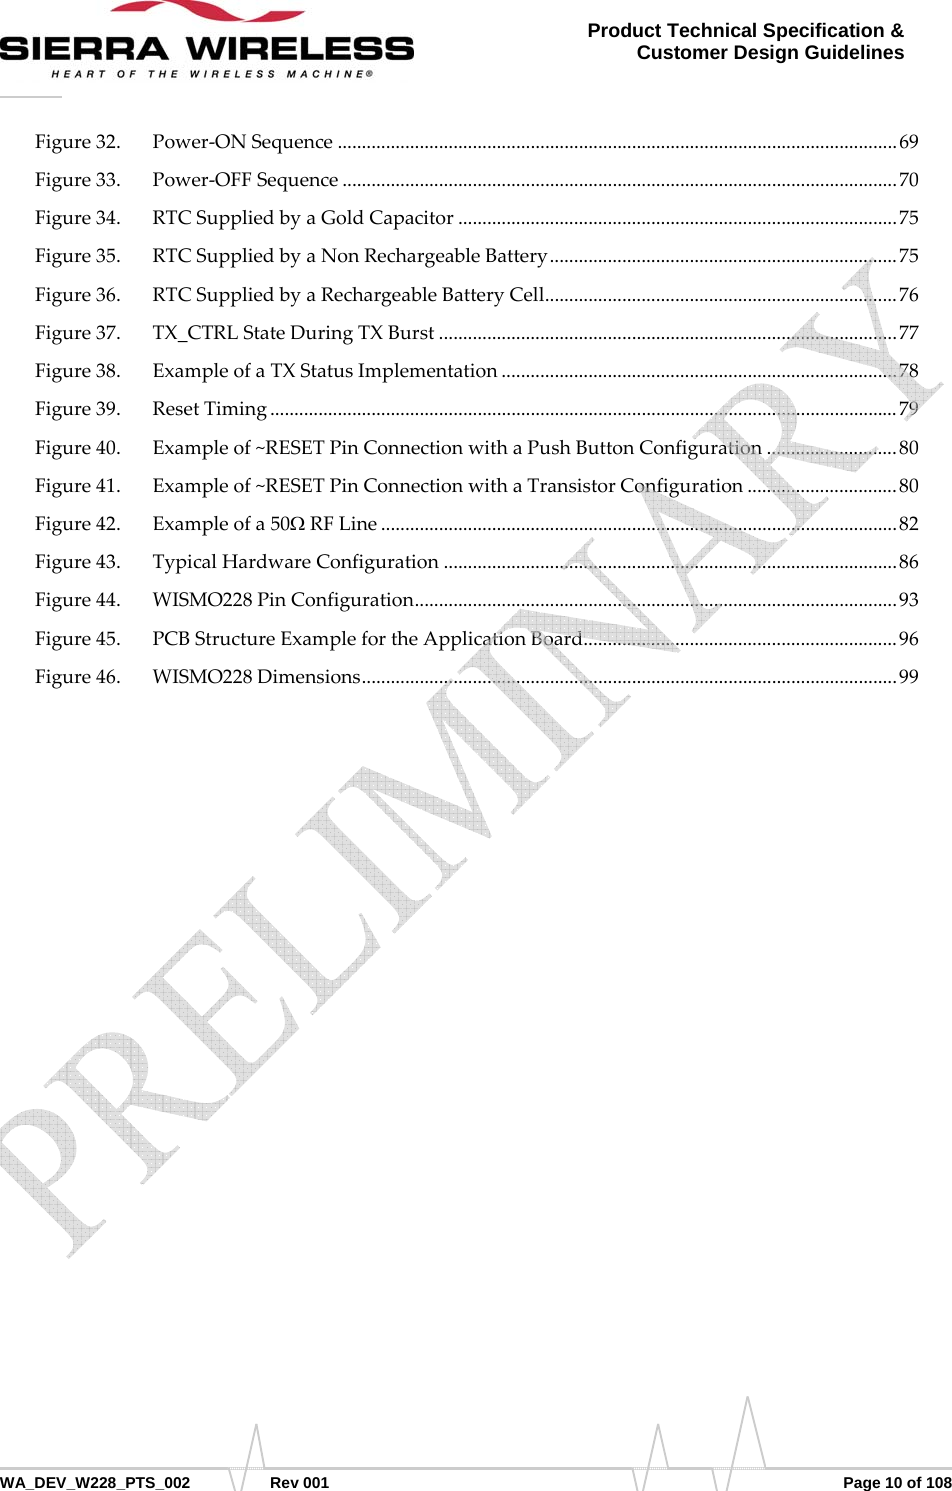      WA_DEV_W228_PTS_002 Rev 001  Page 10 of 108 Product Technical Specification &amp; Customer Design Guidelines Figure32. Power‐ONSequence....................................................................................................................69 Figure33. Power‐OFFSequence...................................................................................................................70 Figure34. RTCSuppliedbyaGoldCapacitor...........................................................................................75 Figure35. RTCSuppliedbyaNonRechargeableBattery........................................................................75 Figure36. RTCSuppliedbyaRechargeableBatteryCell.........................................................................76 Figure37. TX_CTRLStateDuringTXBurst...............................................................................................77 Figure38. ExampleofaTXStatusImplementation..................................................................................78 Figure39. ResetTiming..................................................................................................................................79 Figure40. Exampleof~RESETPinConnectionwithaPushButtonConfiguration...........................80 Figure41. Exampleof~RESETPinConnectionwithaTransistorConfiguration...............................80 Figure42. Exampleofa50ΩRFLine...........................................................................................................82 Figure43. TypicalHardwareConfiguration..............................................................................................86 Figure44. WISMO228PinConfiguration....................................................................................................93 Figure45. PCBStructureExamplefortheApplicationBoard.................................................................96 Figure46. WISMO228Dimensions...............................................................................................................99    